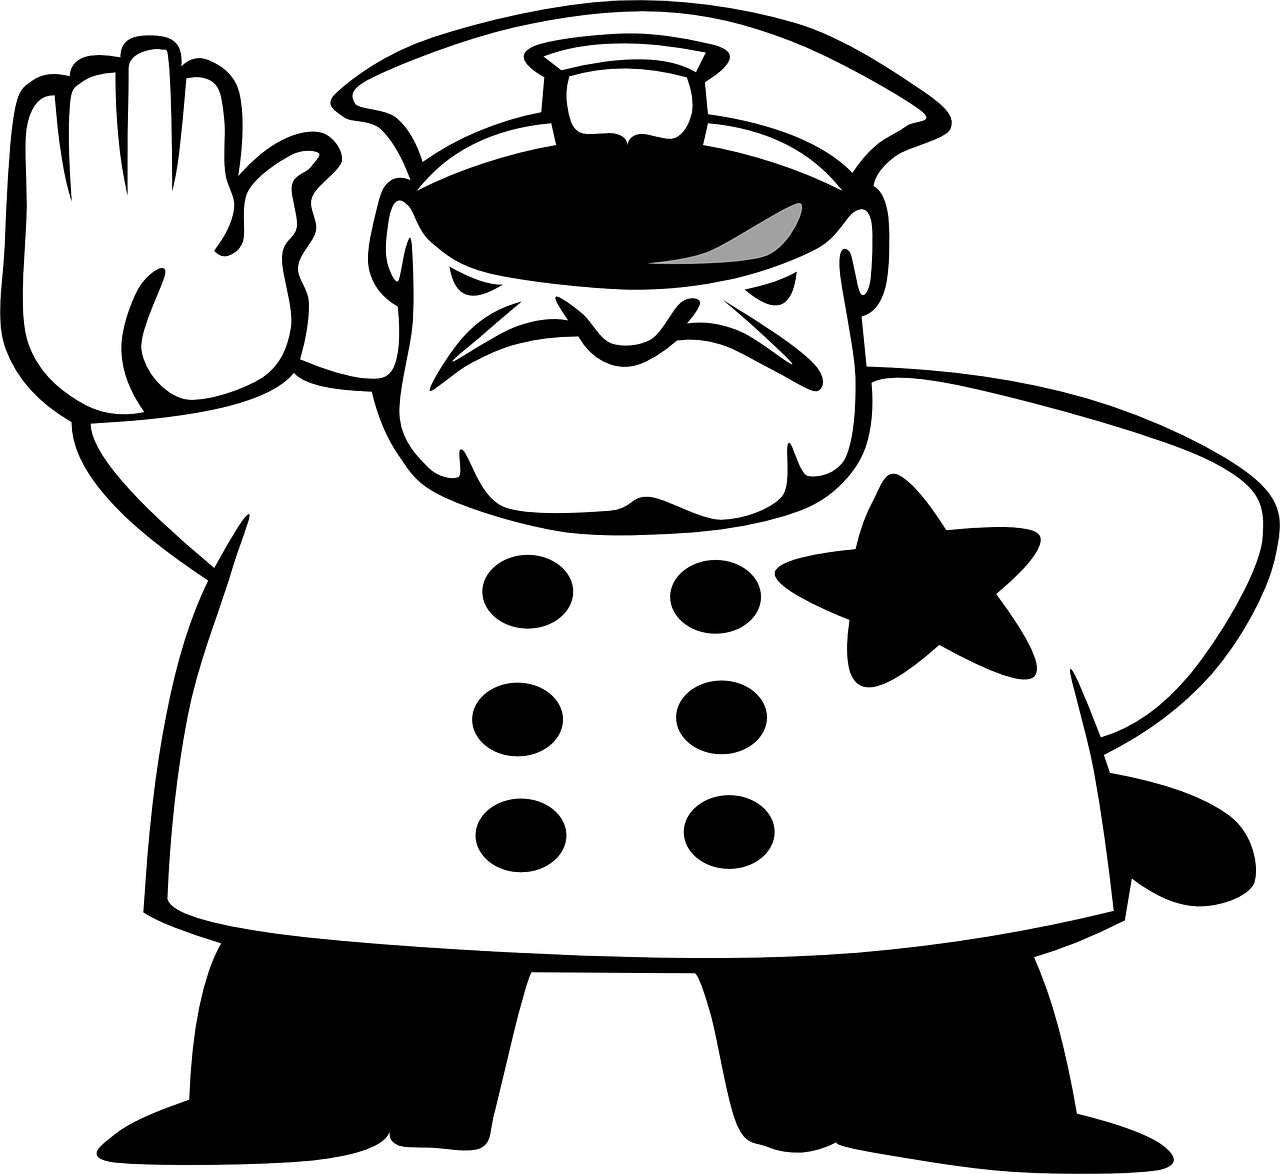 Police hat at getdrawings. Handcuffs clipart drawing